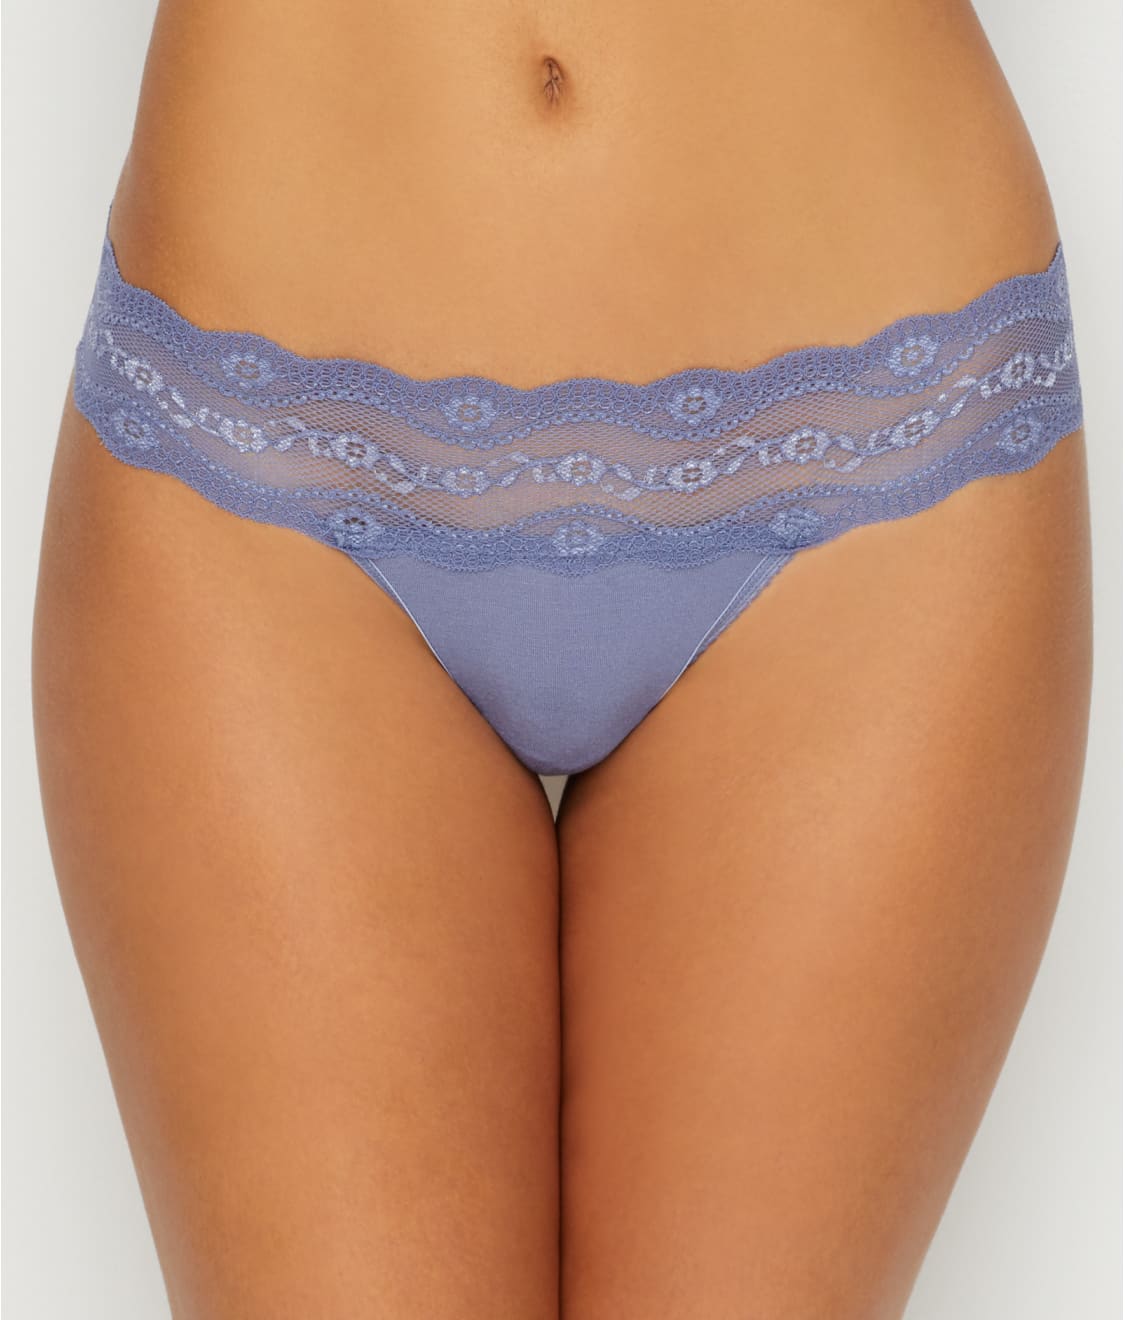 B TEMPT'D by WACOAL THONG PANTIES cotton/modal w LACE 976256 BLUE BRAND NEW 